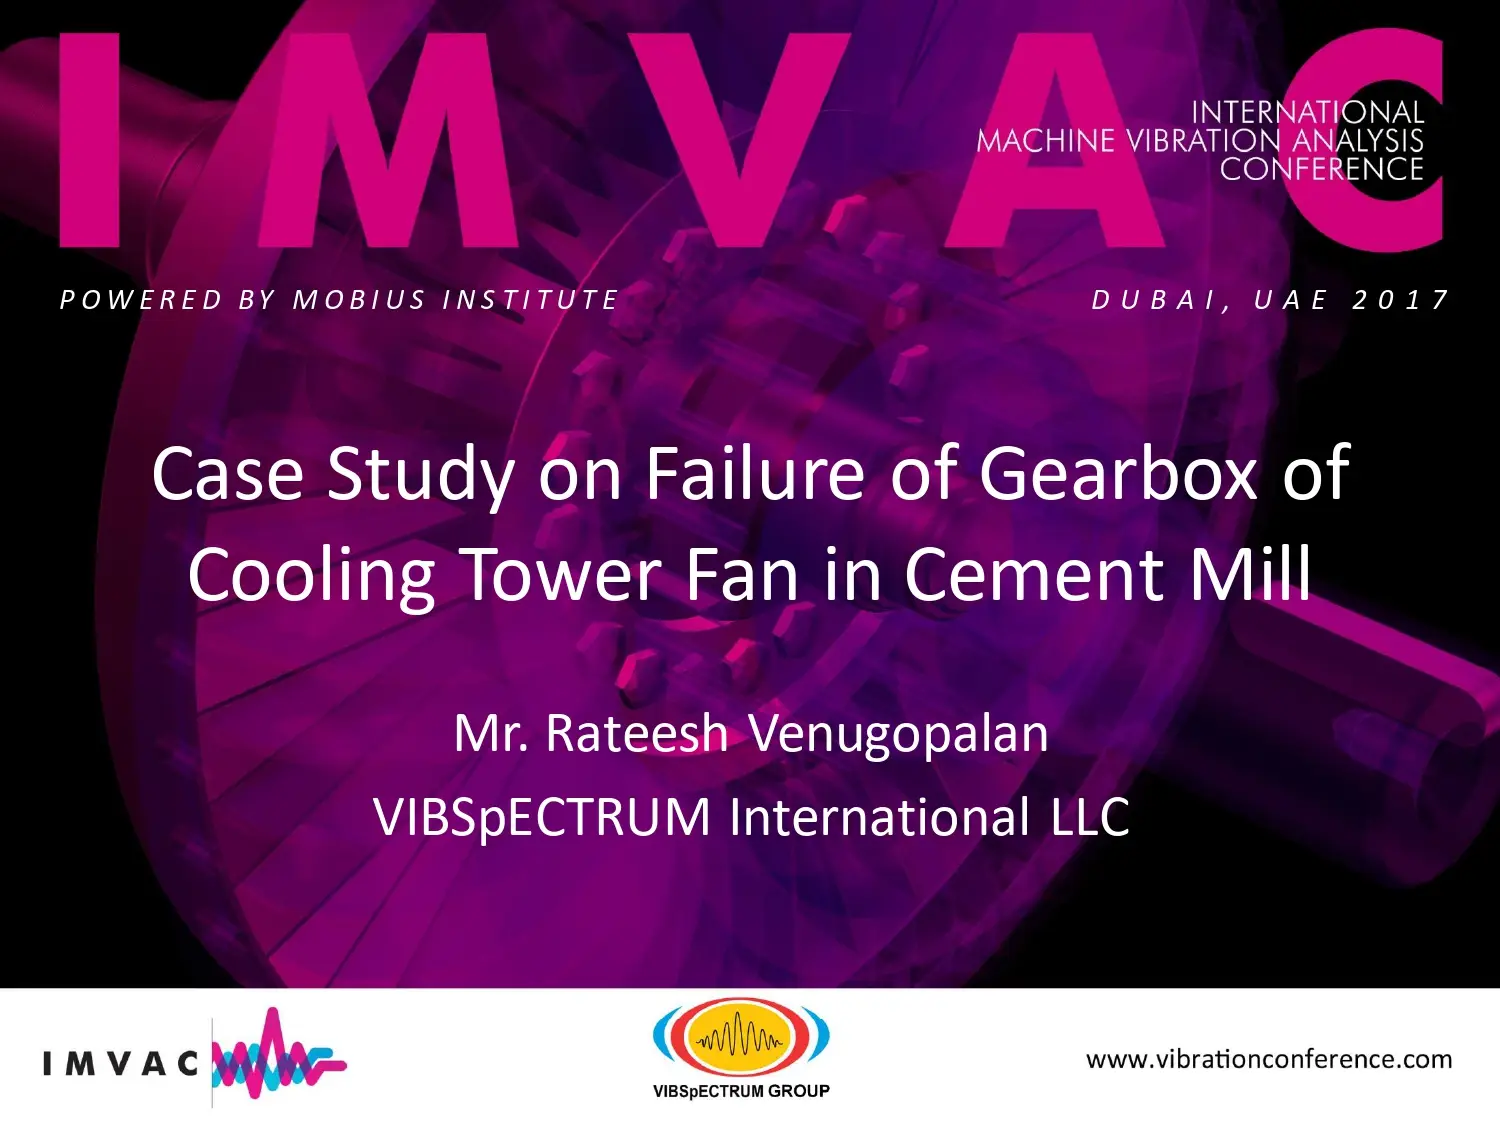 Case Study on Failure of Gearbox of Cooling Tower Fan in Cement Mill